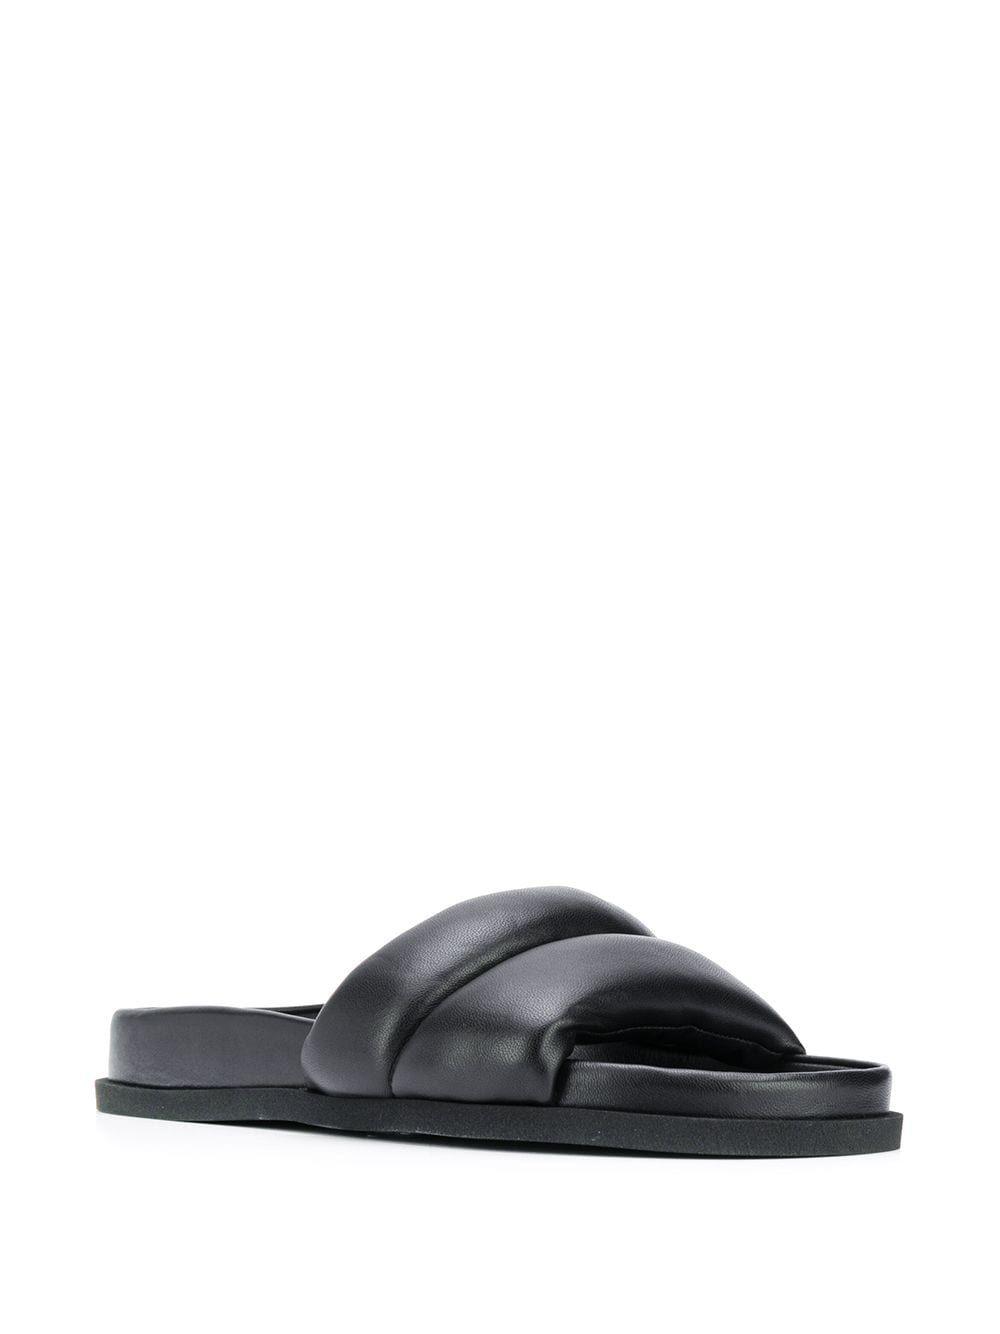 KENZO Leather Sandals in Black for Men - Lyst